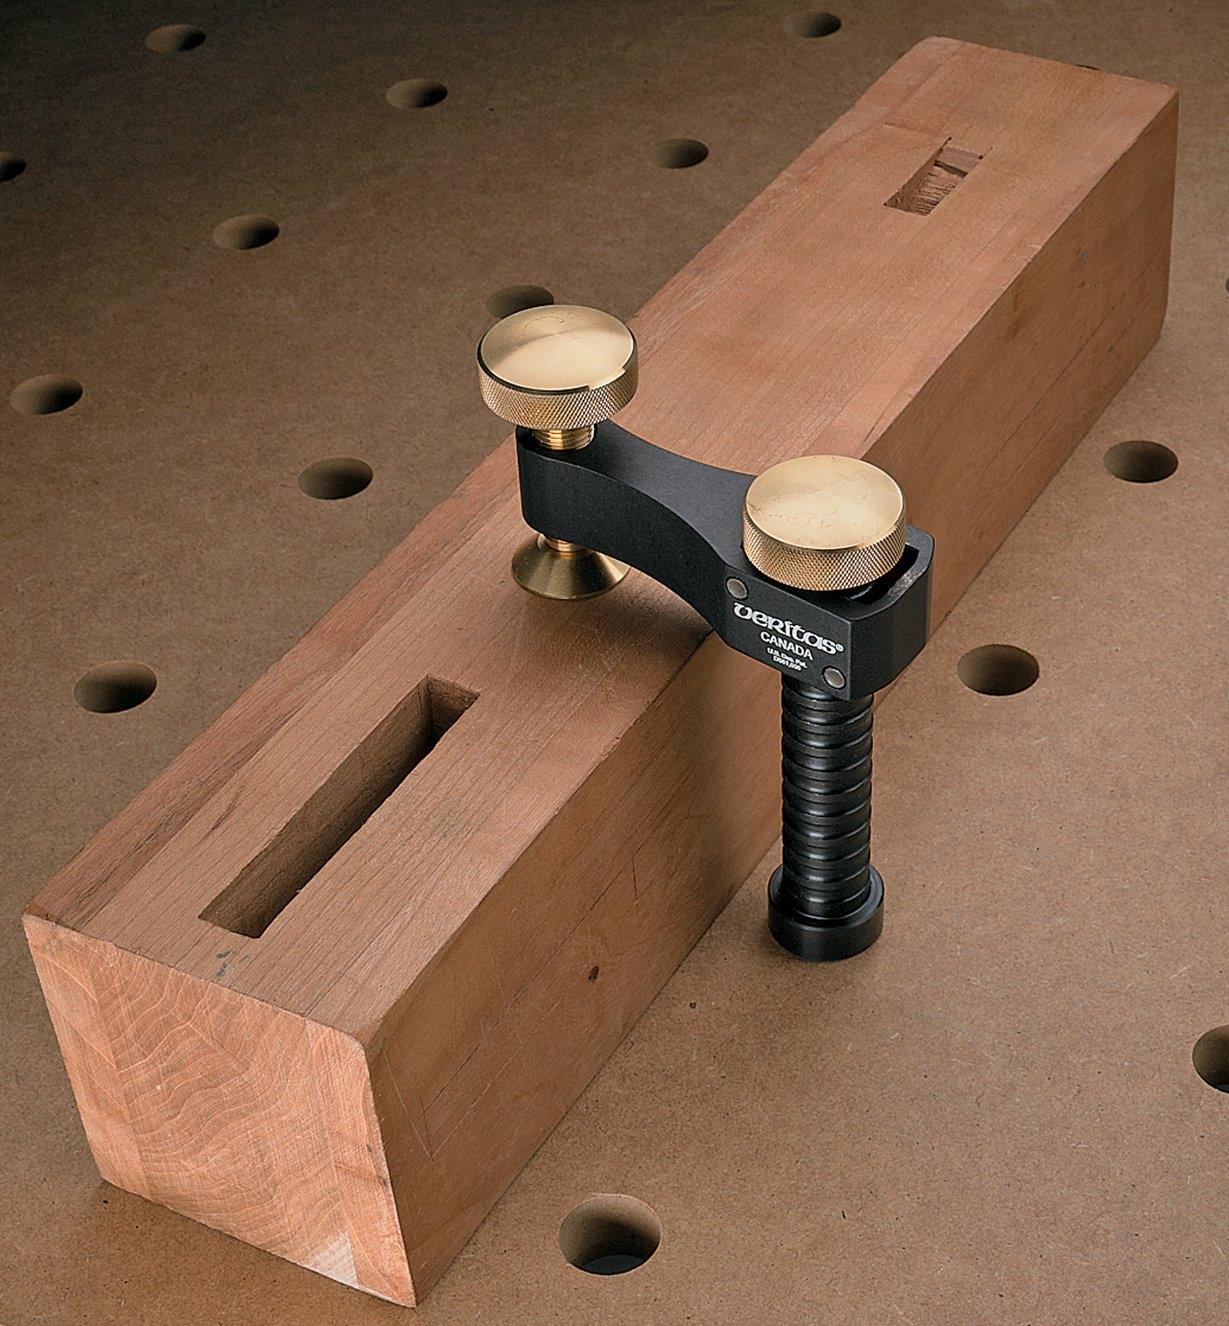 Surface clamp holding a block of wood on a workbench